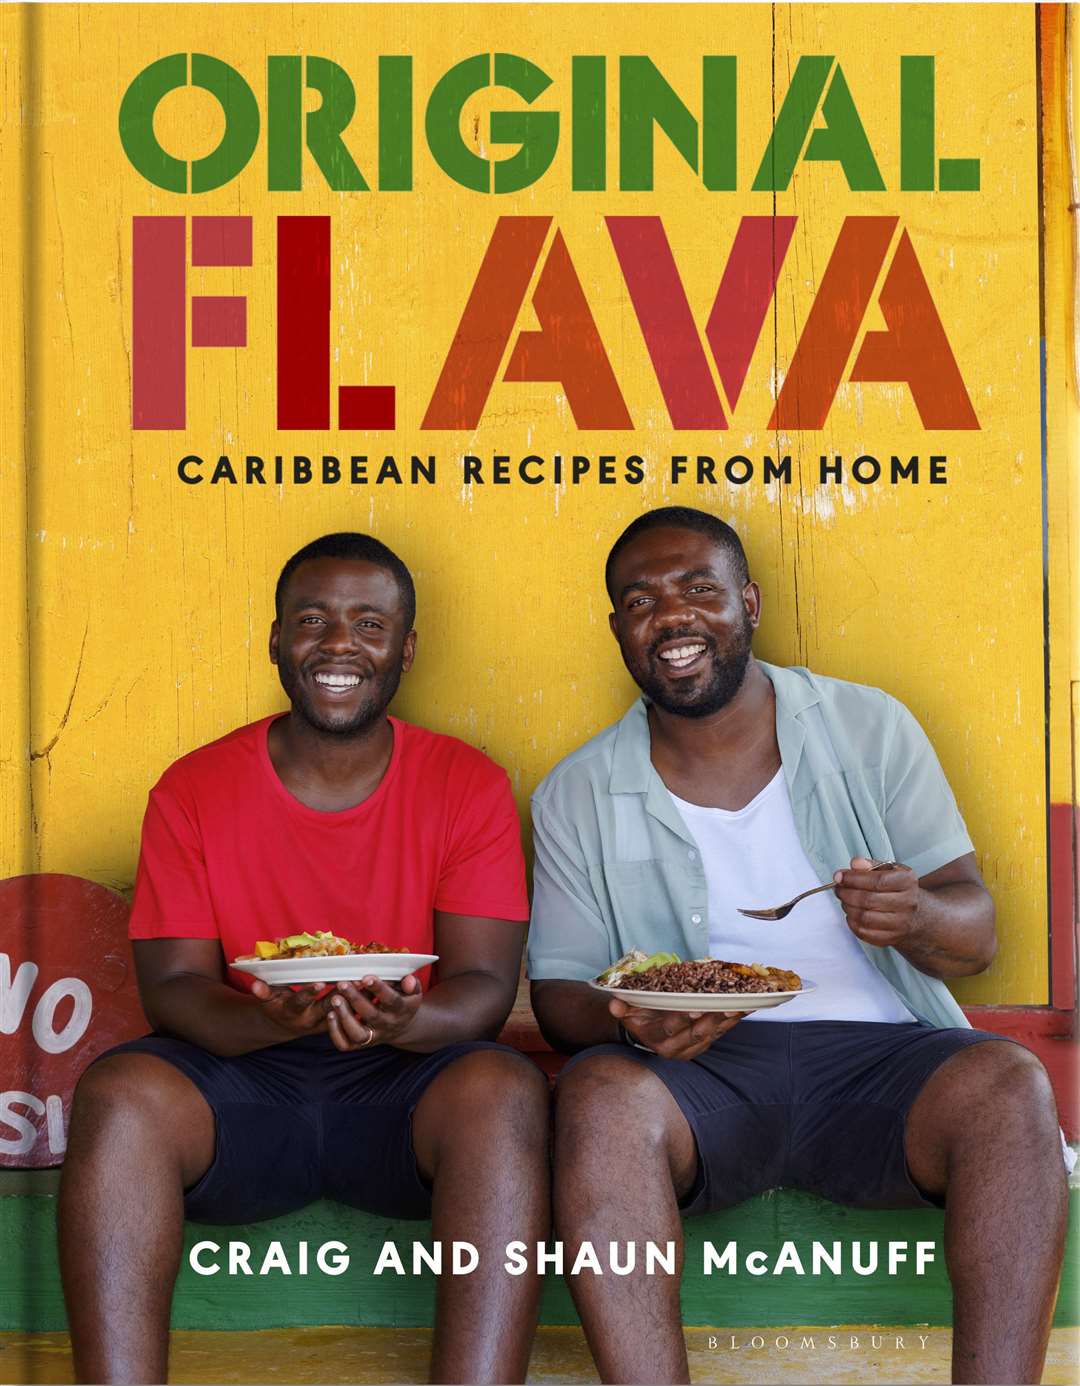 Original Flava: Caribbean Recipes From Home by Craig and Shaun McAnuff, is published by Bloomsbury, priced £20. Available now.